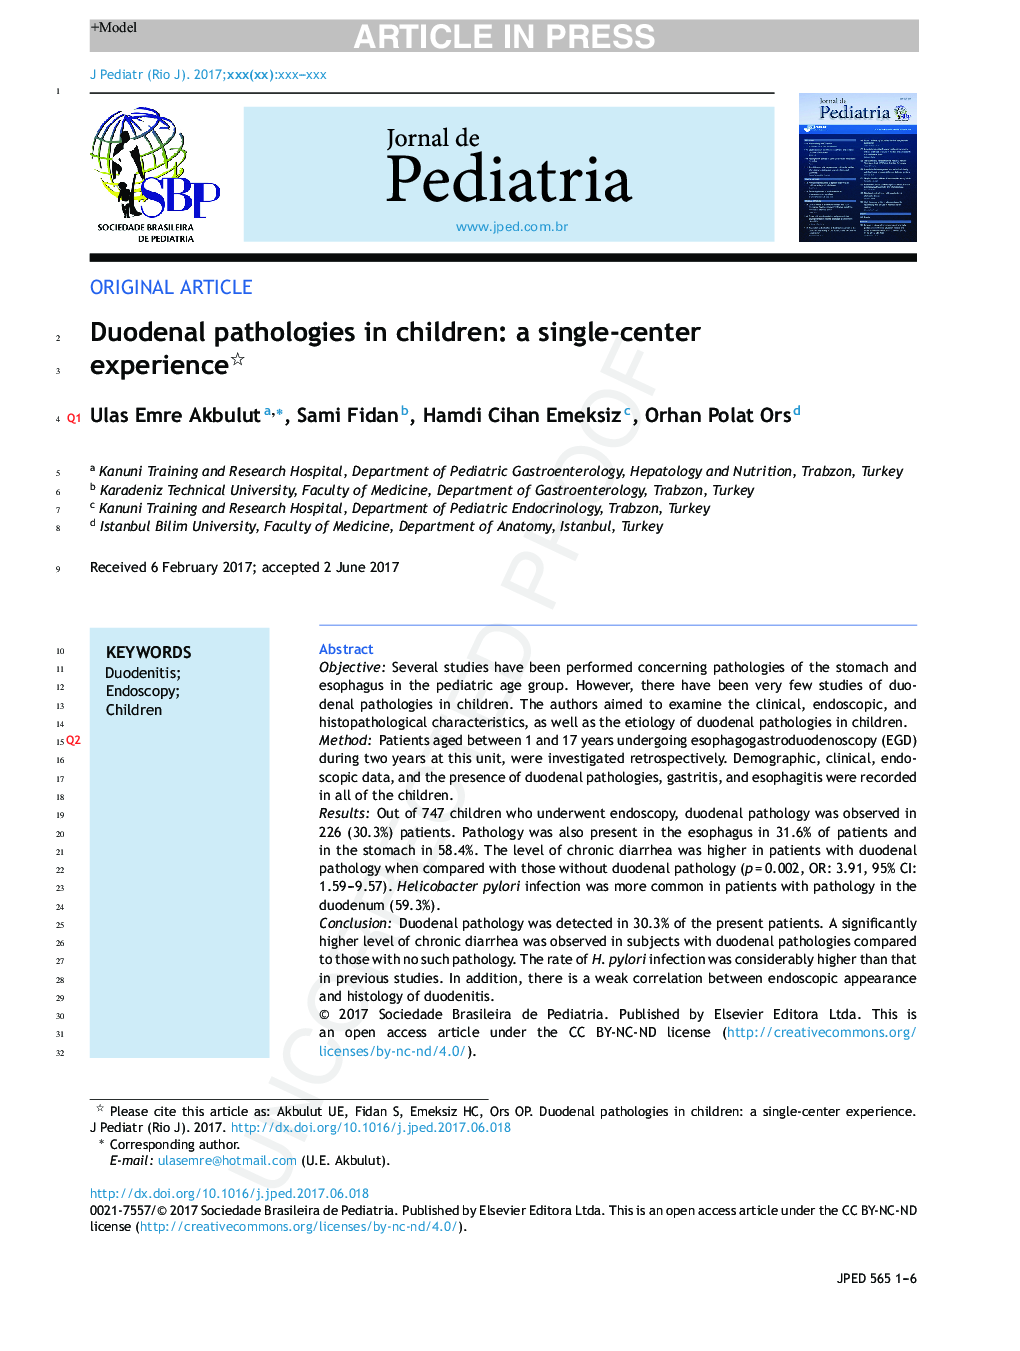 Duodenal pathologies in children: a single-center experience